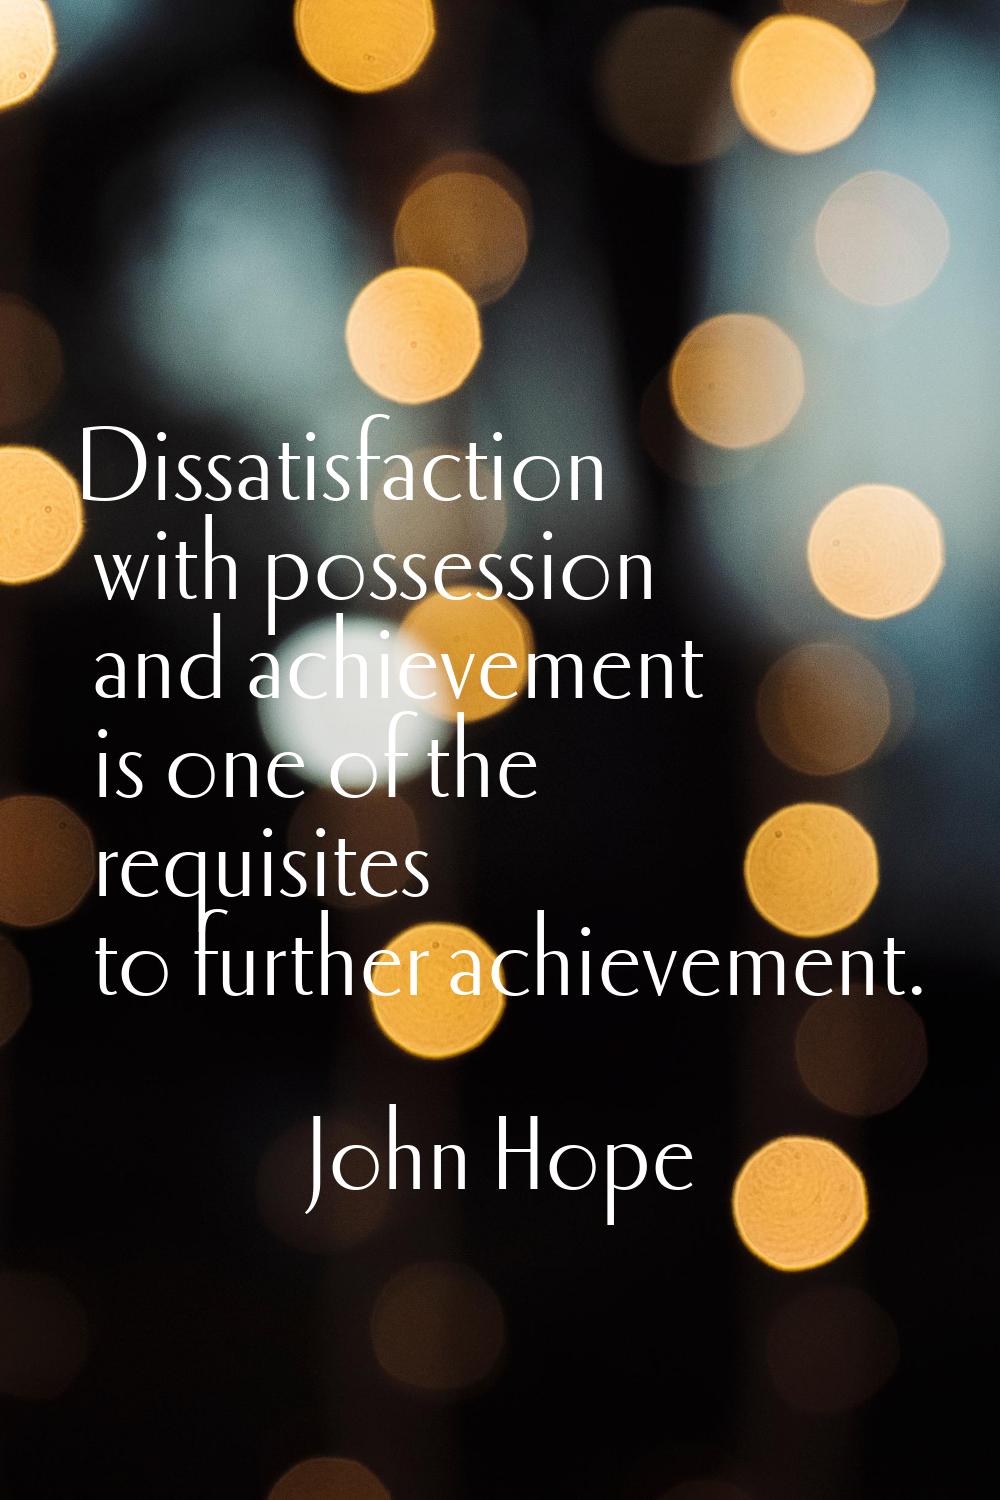 Dissatisfaction with possession and achievement is one of the requisites to further achievement.